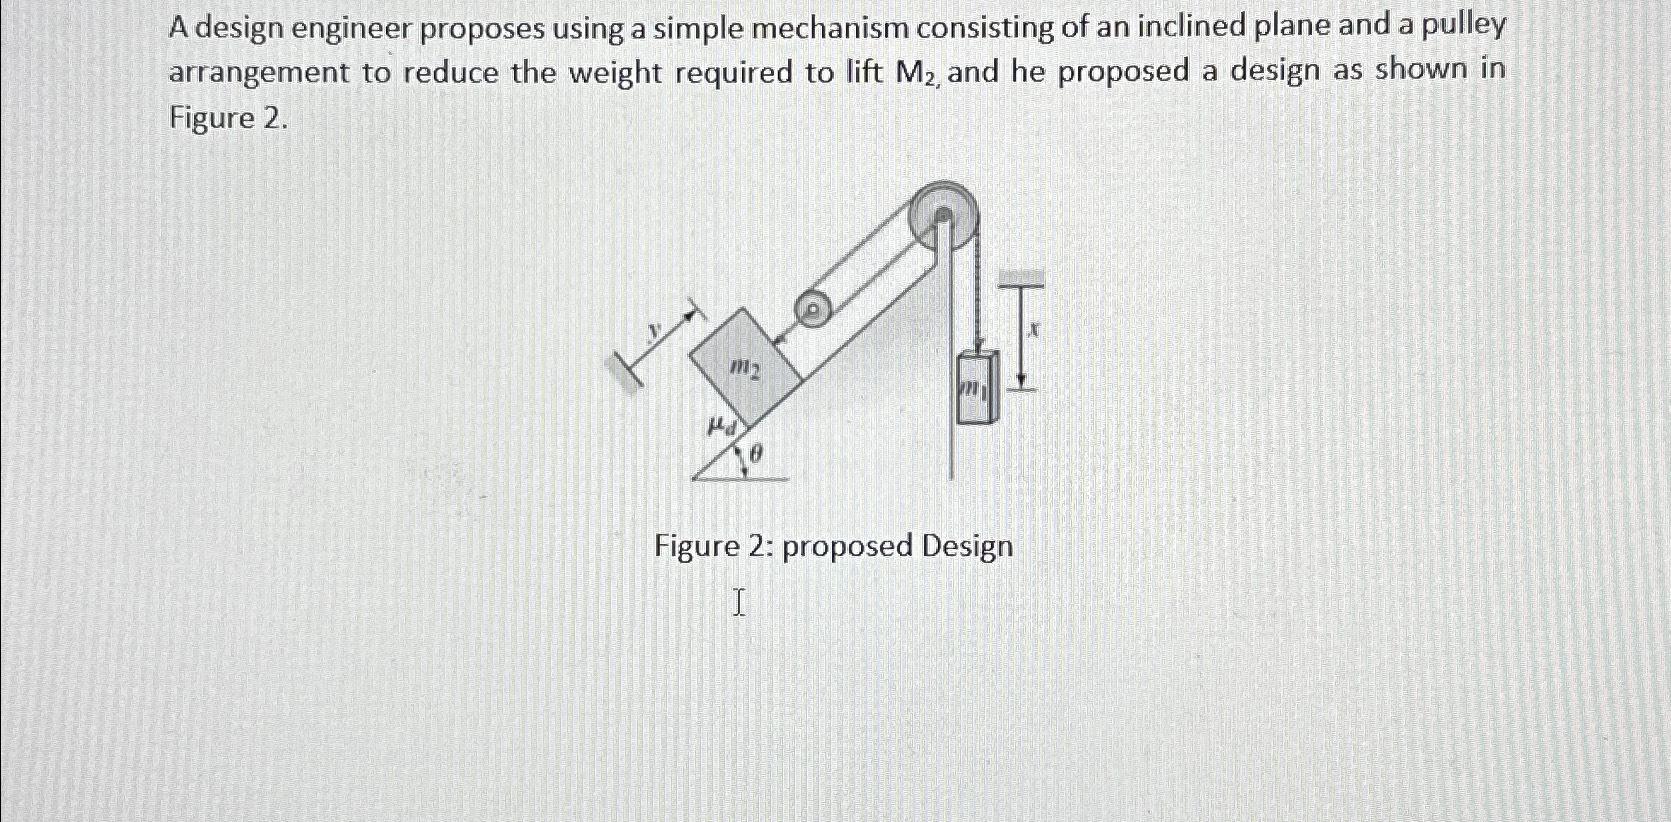 A design engineer proposes using a simple mechanism consisting of an inclined plane and a pulley arrangement